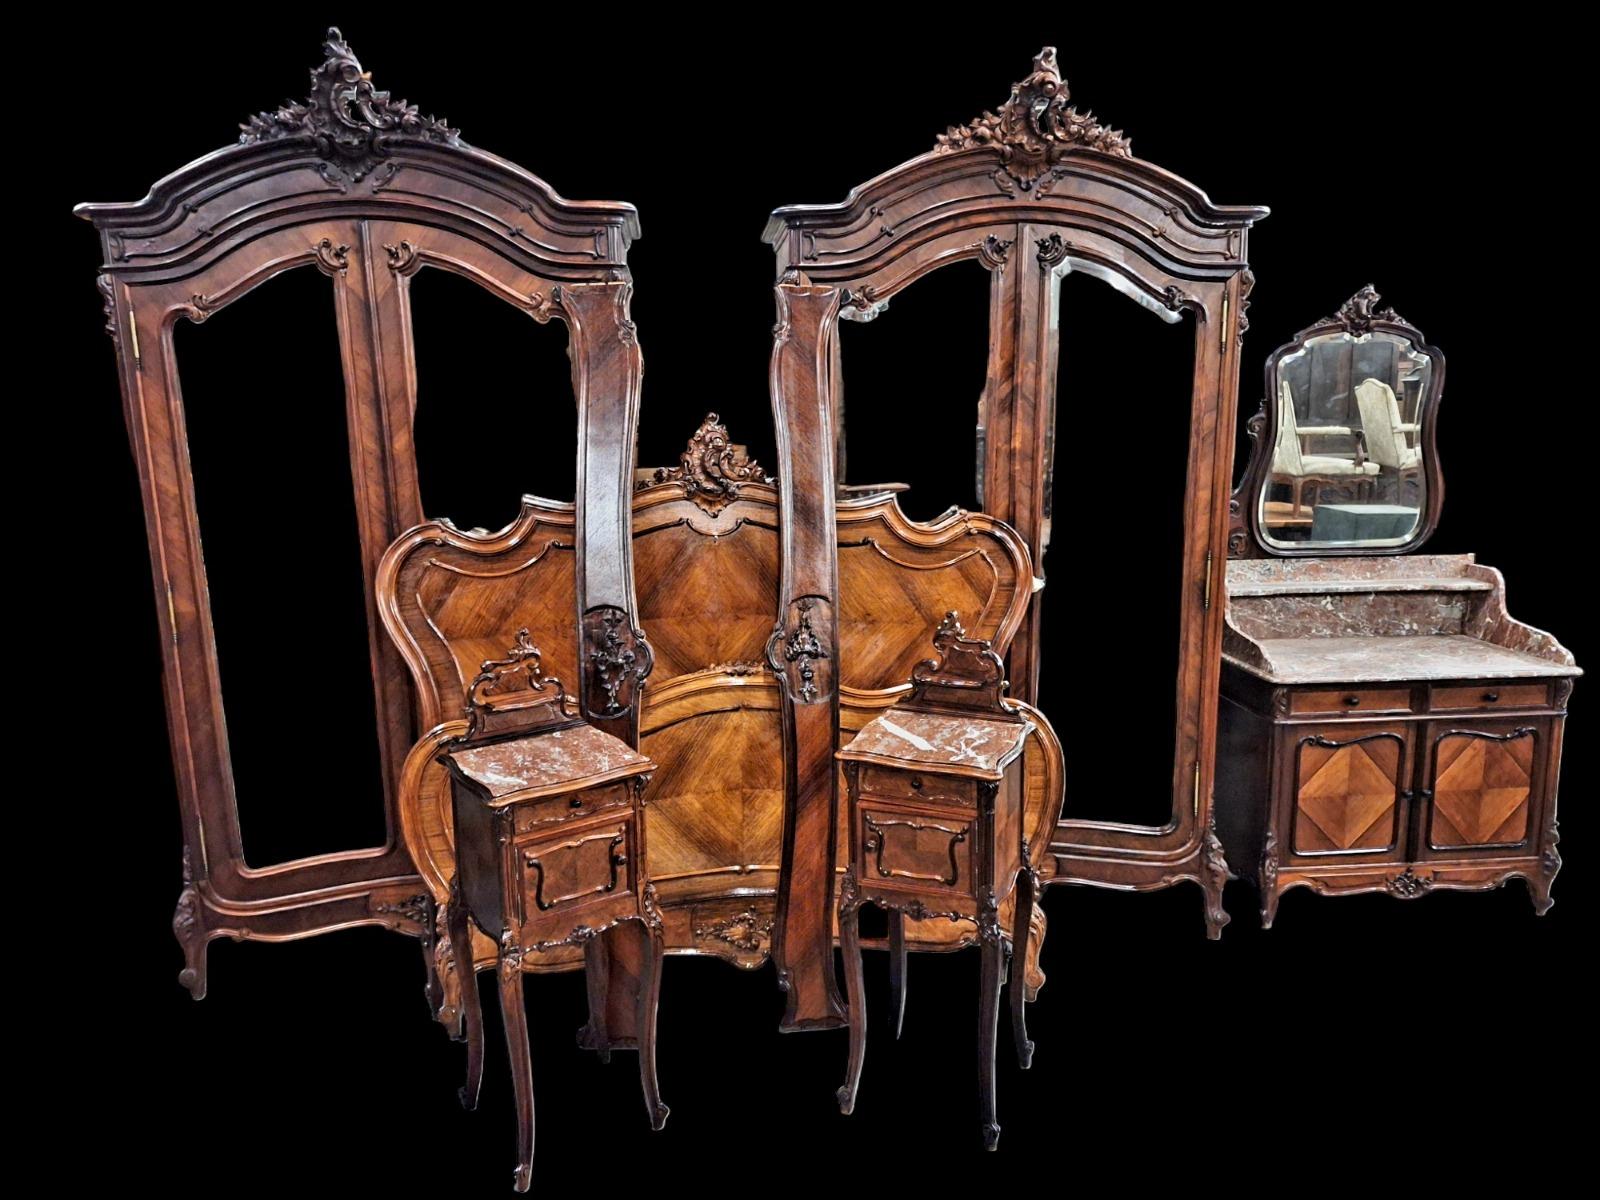 Louis XV style bedroomsuite in marquetry and walnut.